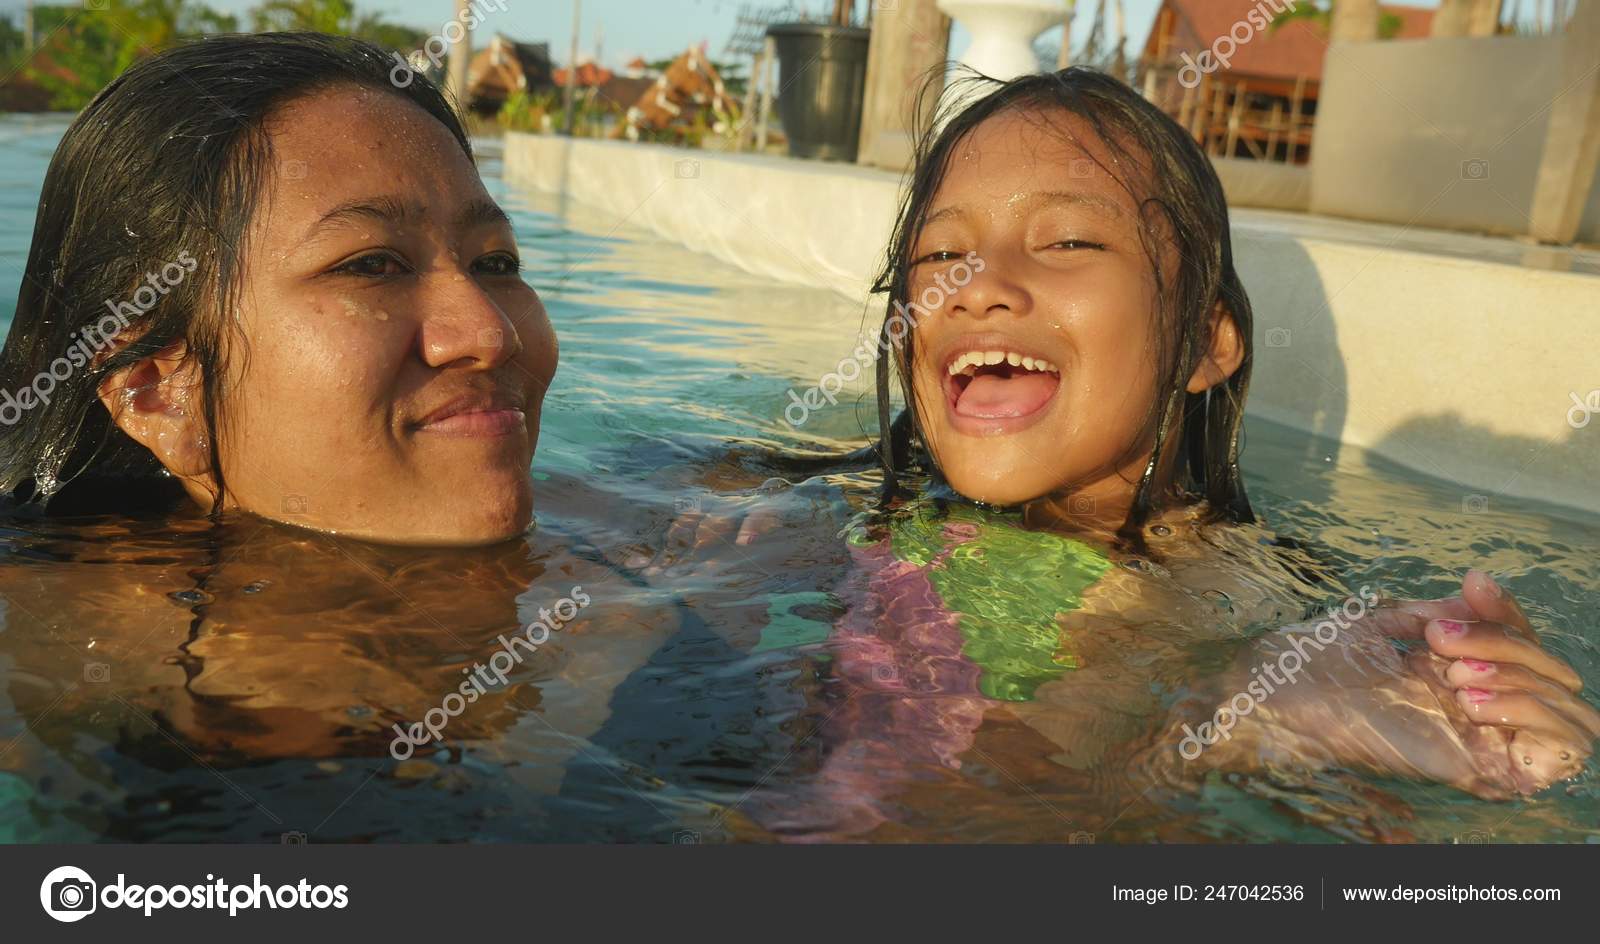 Lifestyle candid portrait of woman and young daughter 7 or 8 years old girl having fun togeth...